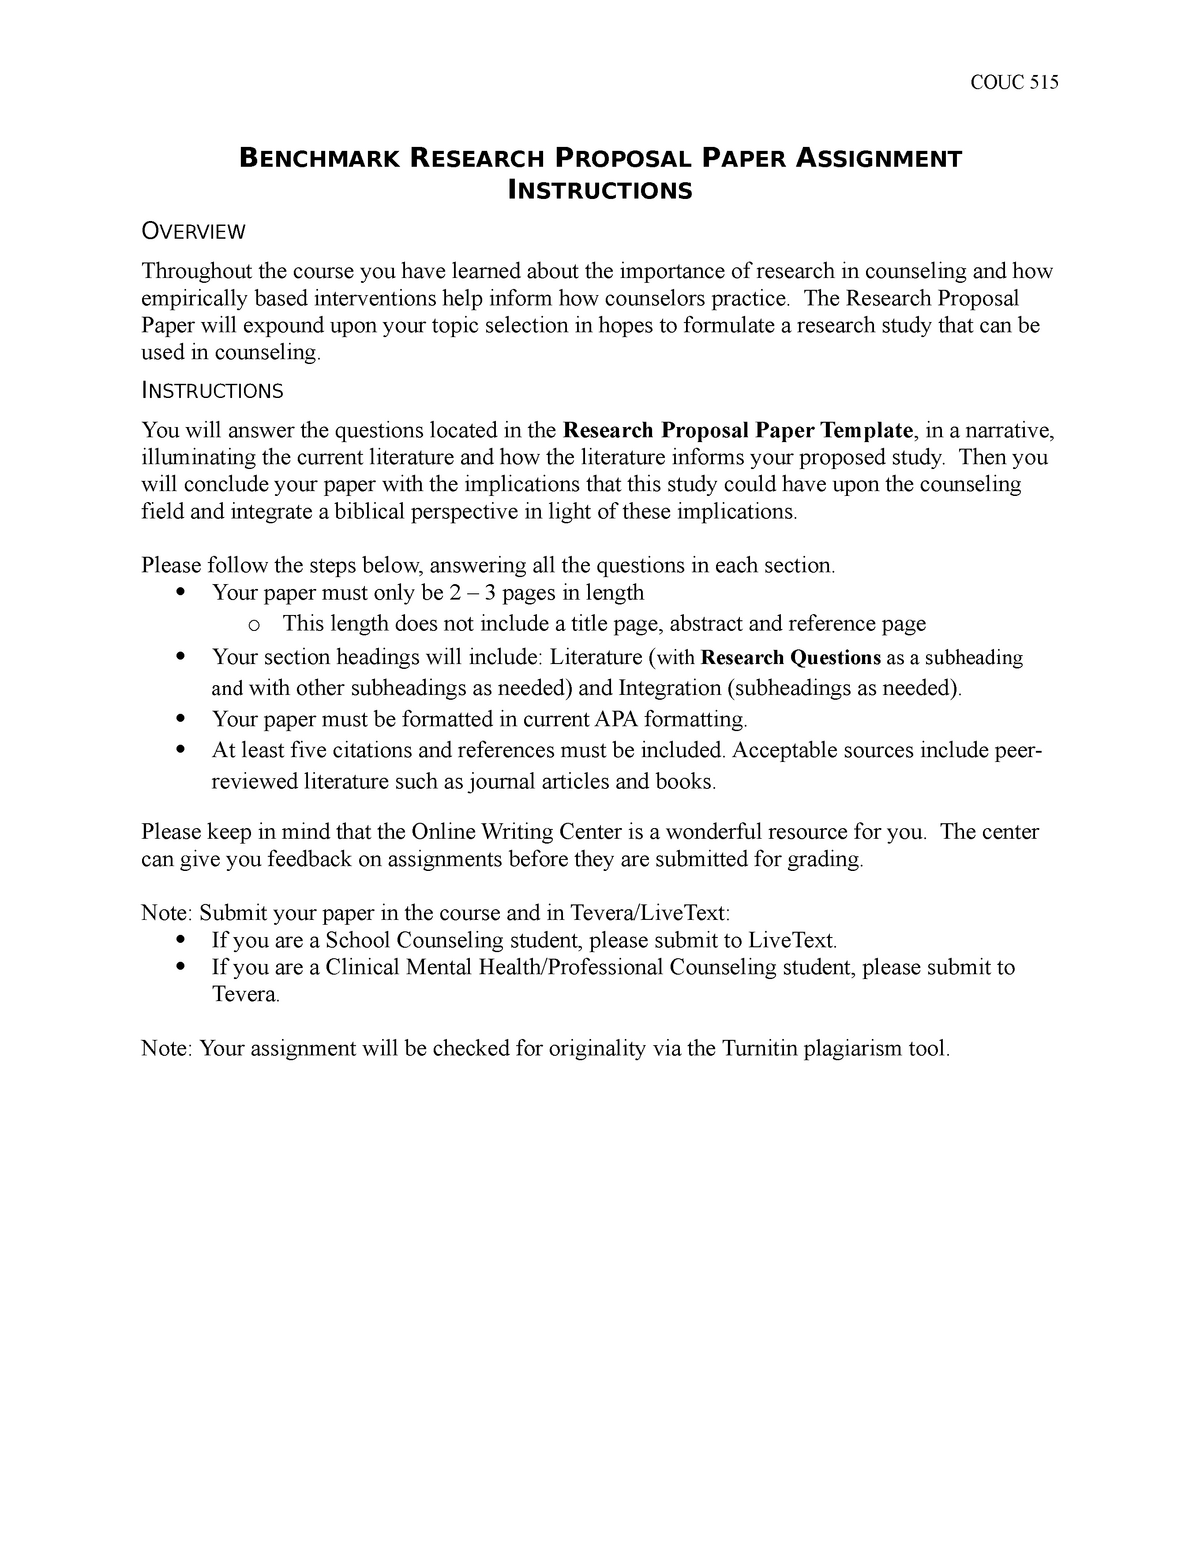 research paper assignment guidelines